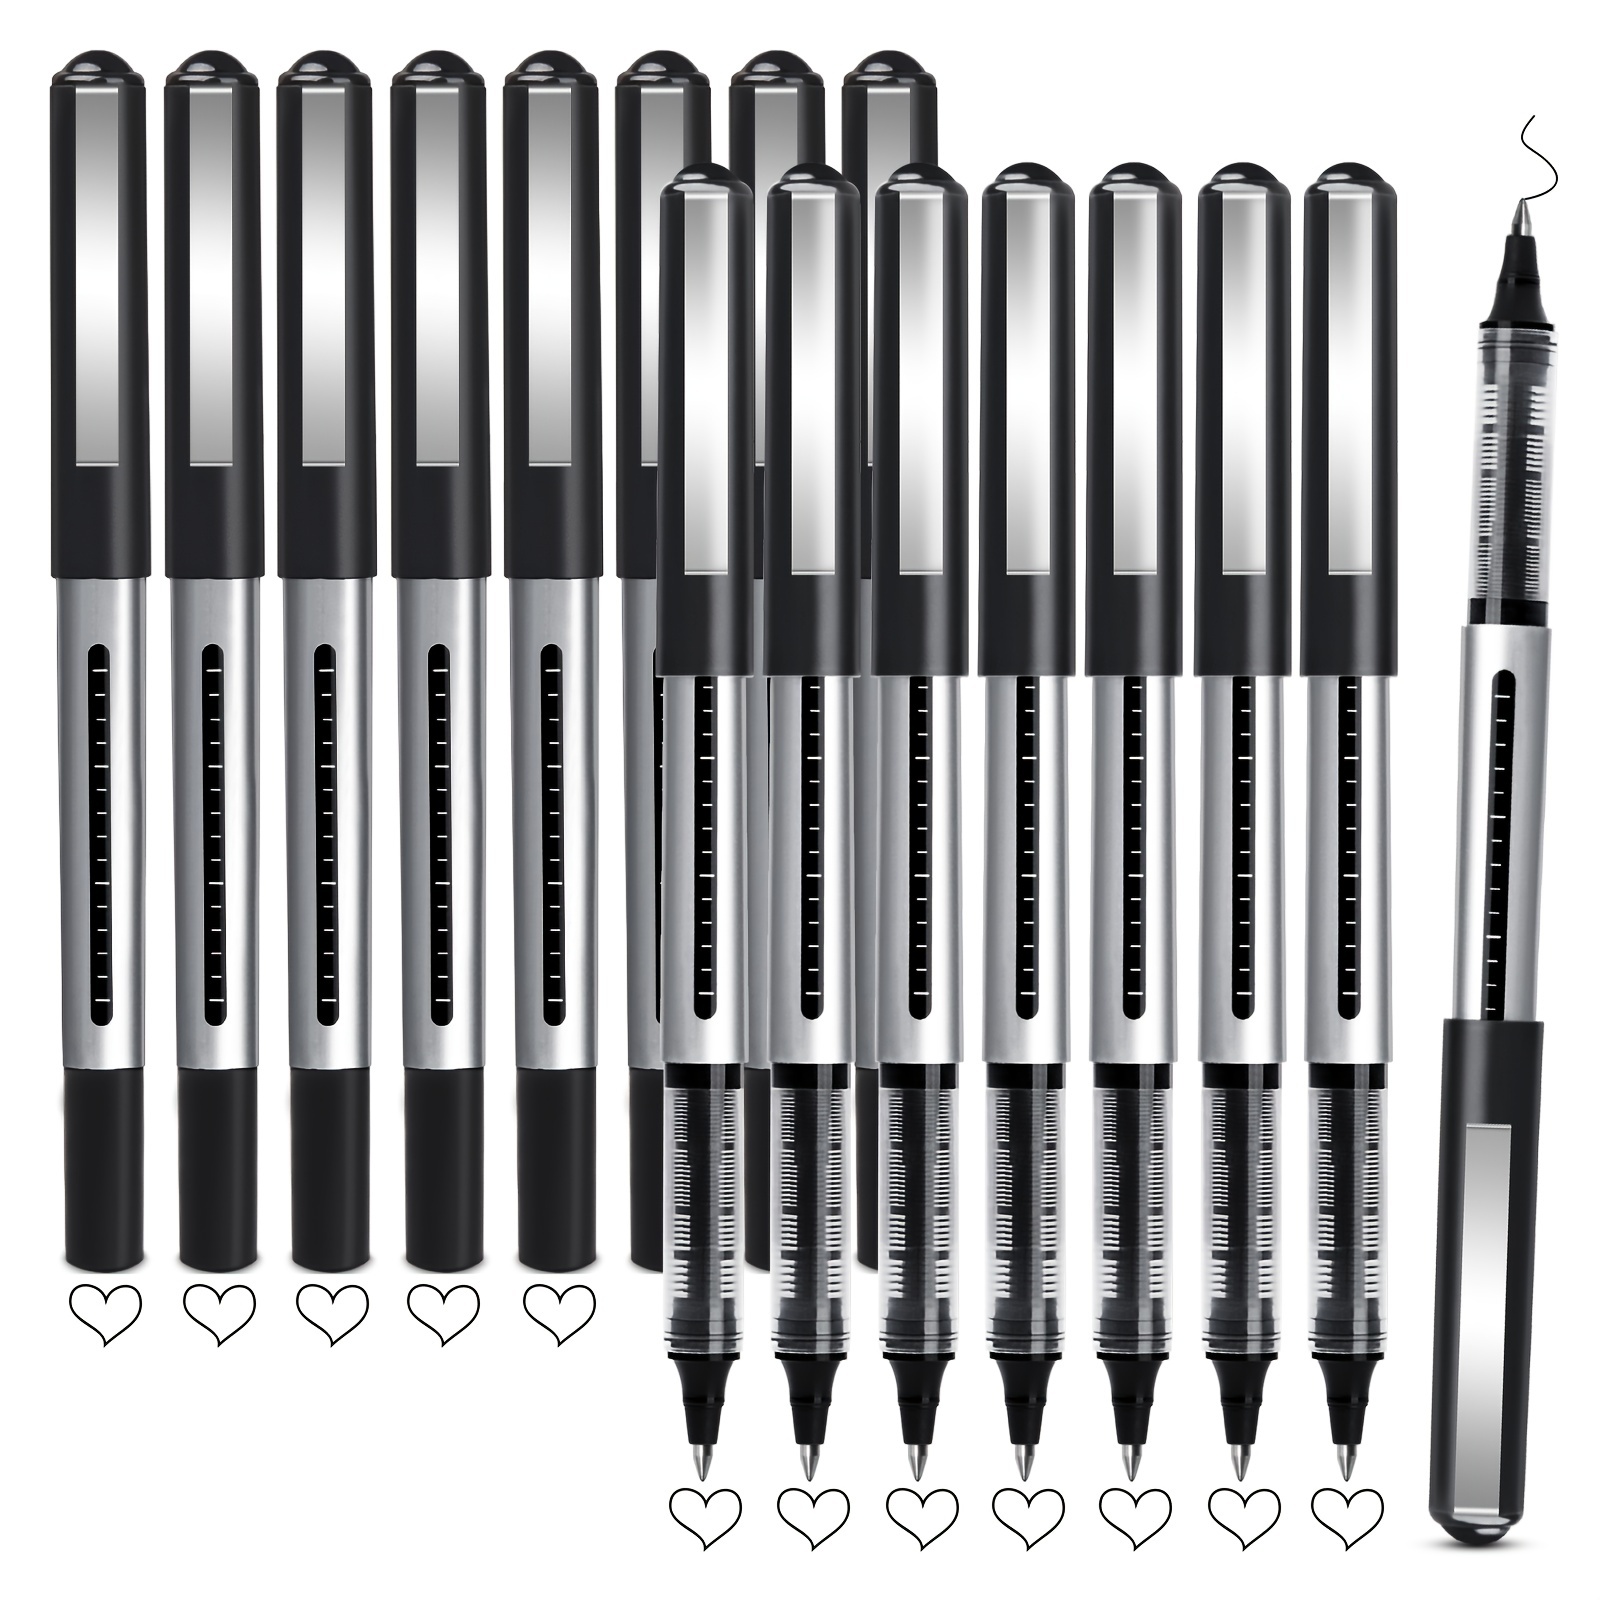 Rollerball Pen Fine Point Pens: 16 Pack 0.5mm Extra Thin Fine Tip